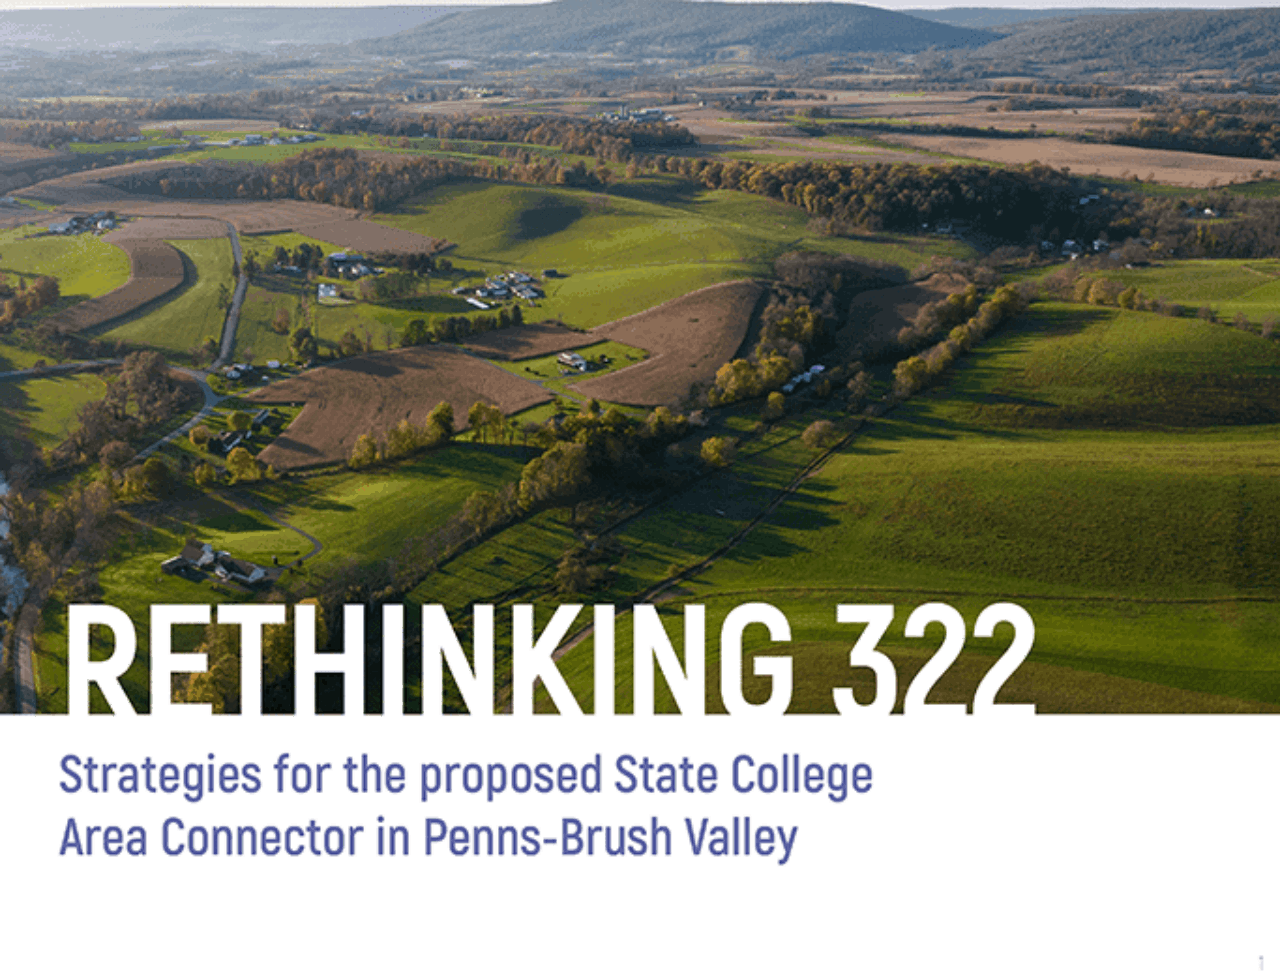 The cover of Rethinking 322 booklet featuring an overhead view of the Penns-Brush Valley area in Central Pennsylvania.